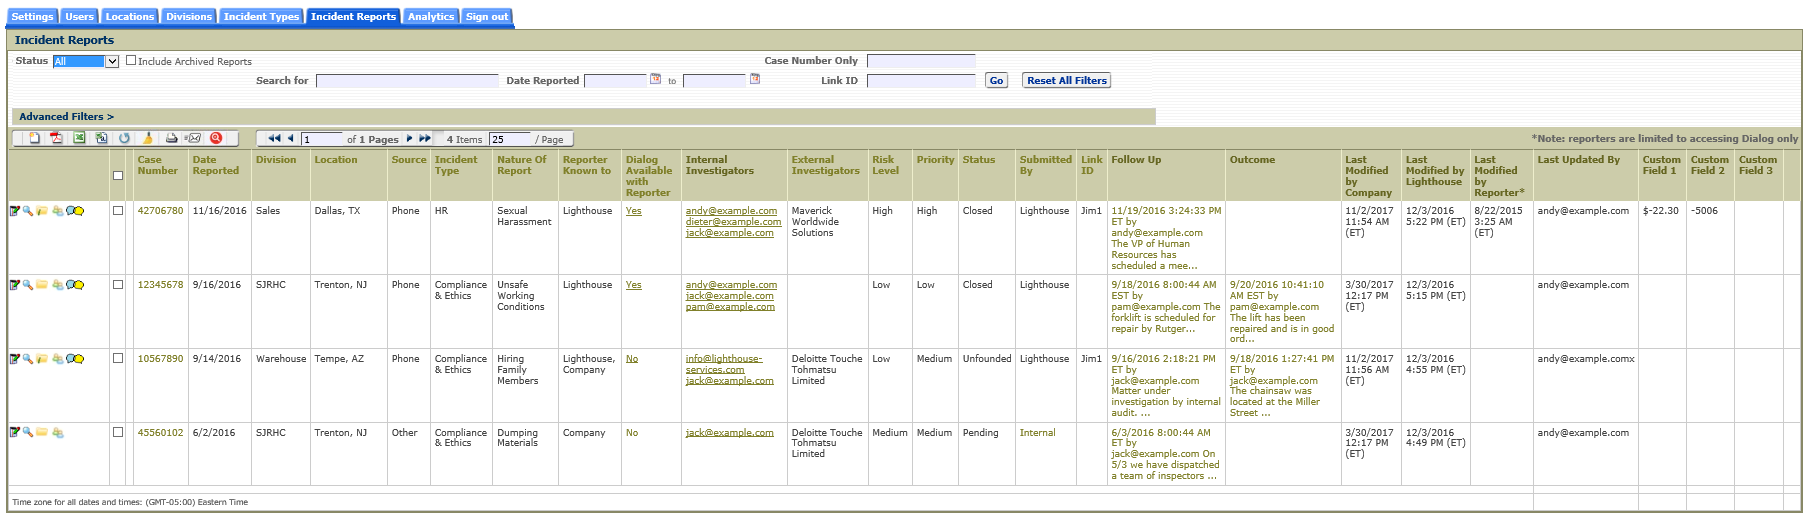 CMS incident reports tab